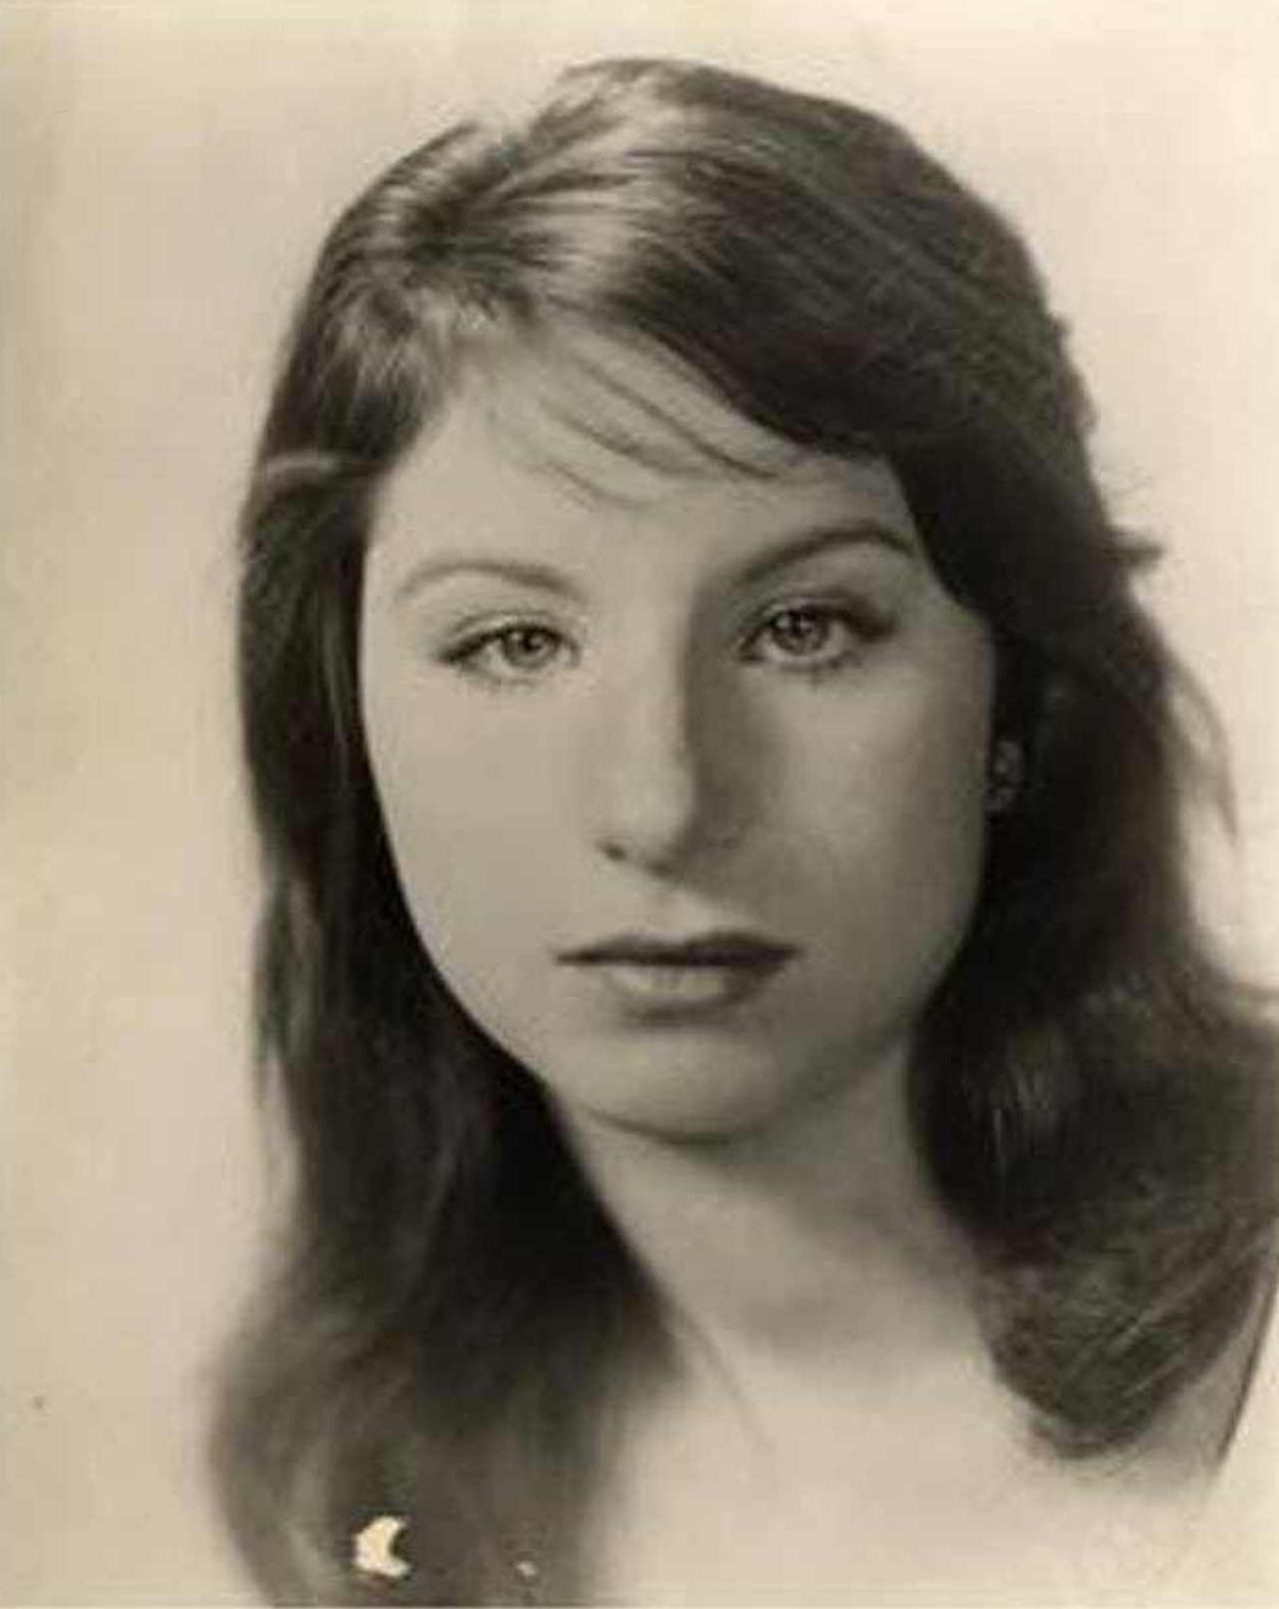 Young Barbra Streisand during her high school